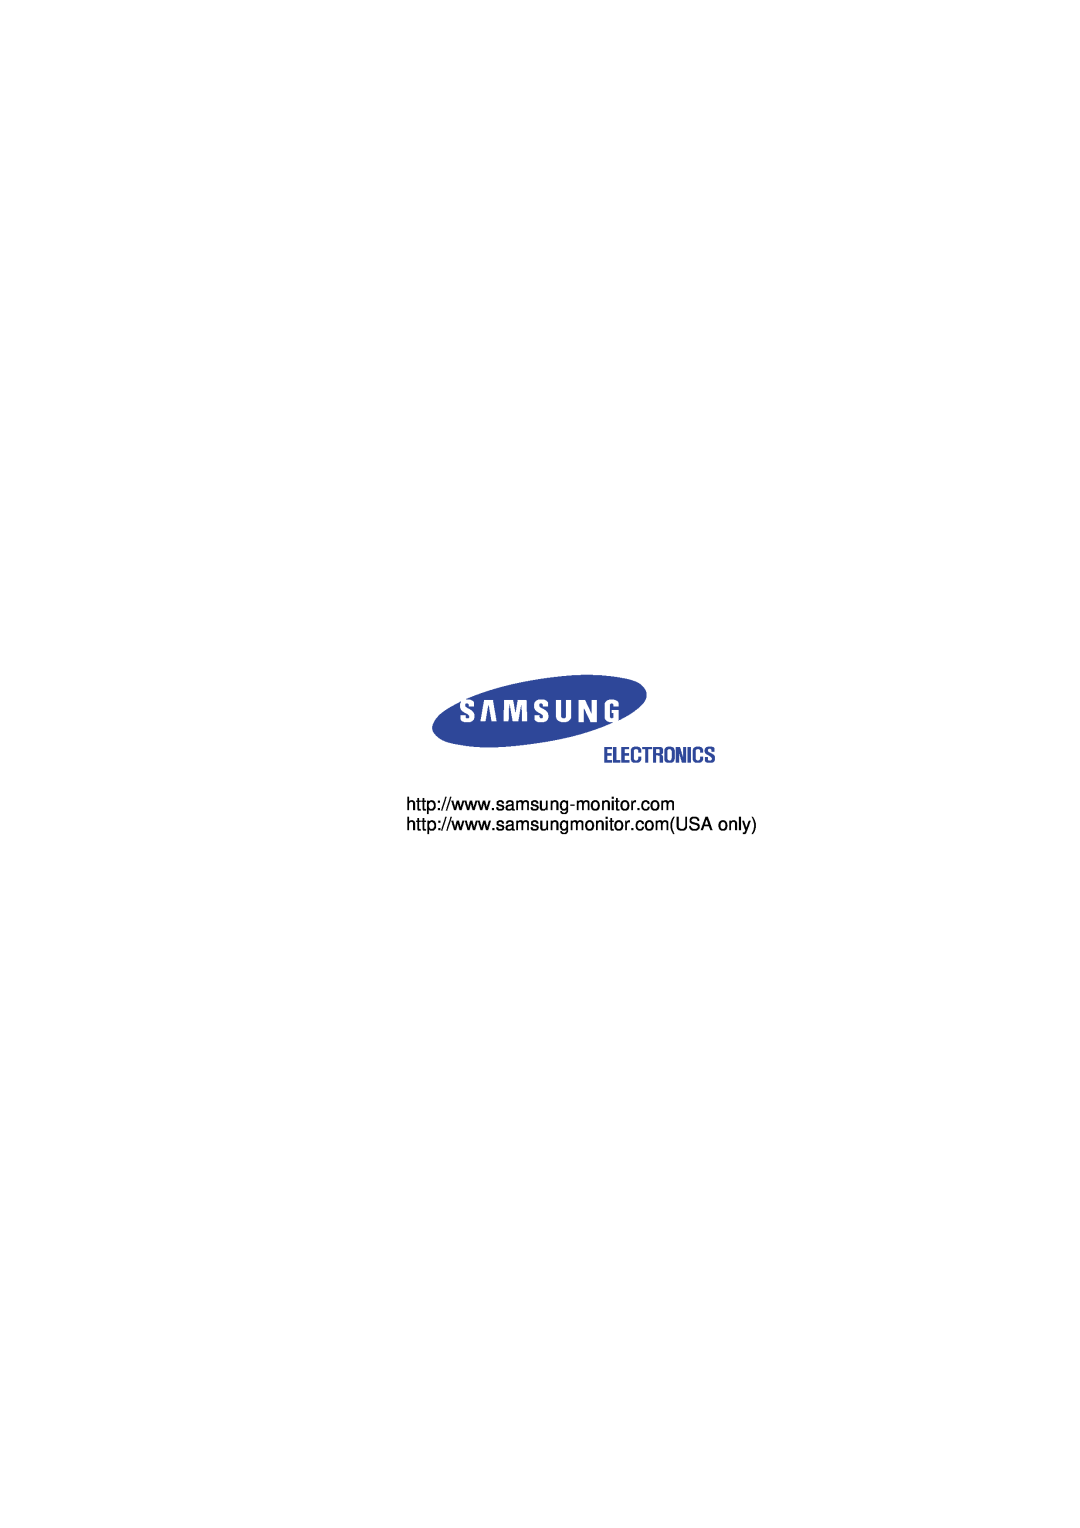 Samsung 750s, 753s, 753v, 753Ms, 750Ms manual Installing the Video Driver 